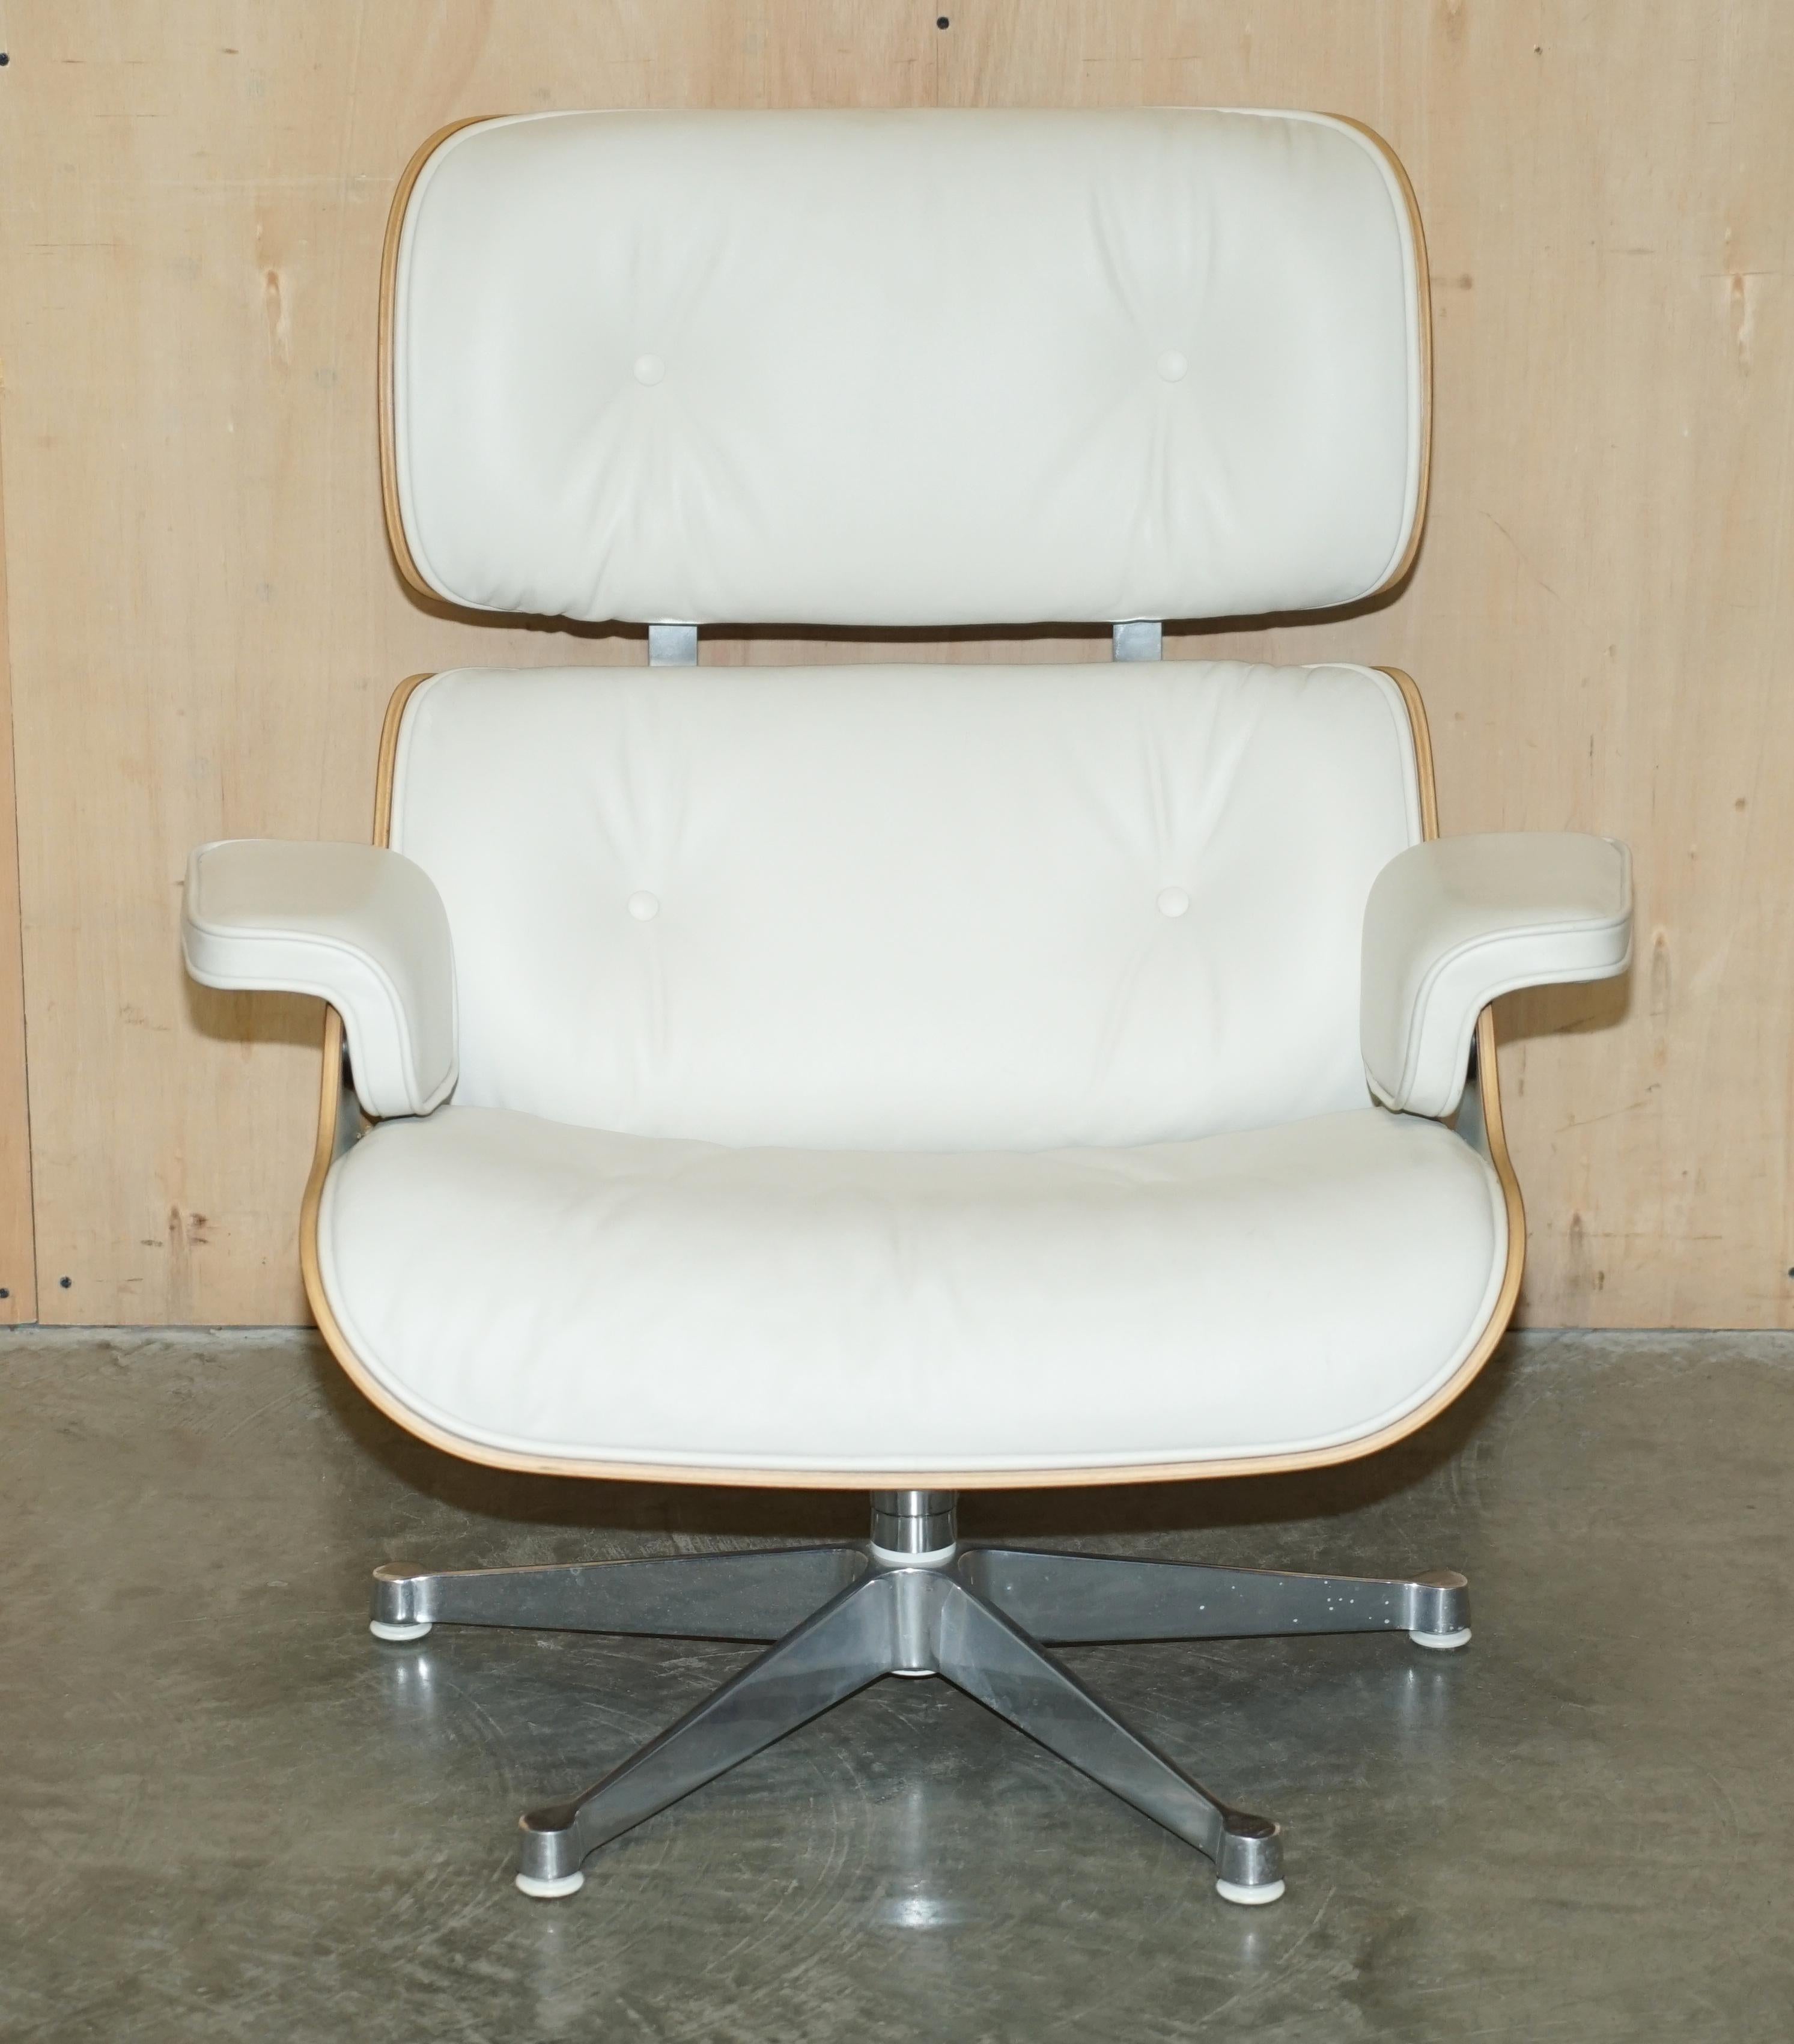 Mid-Century Modern Whiting fauteuil de salon Charles and Ray Eames american cherry wood white leather en vente